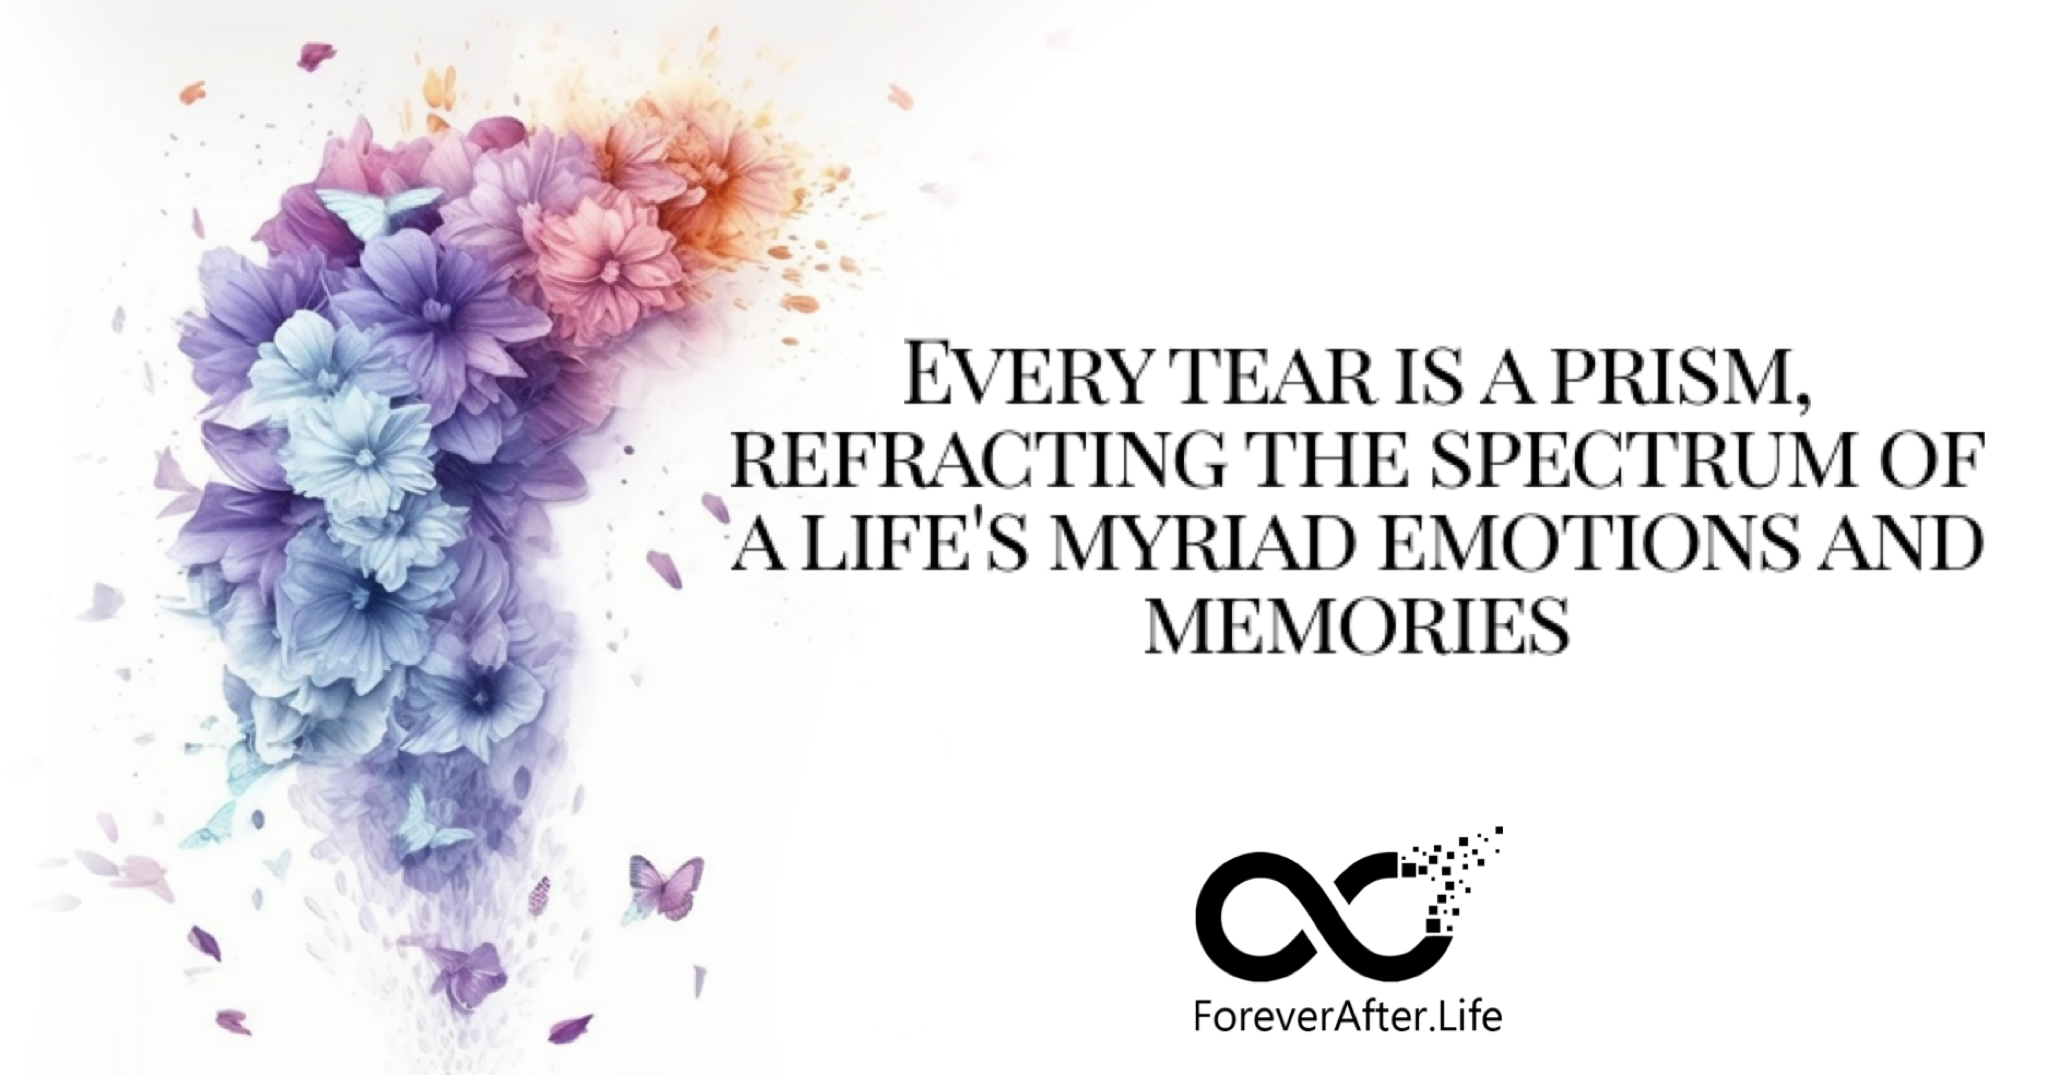 Every tear is a prism, refracting the spectrum of a life's myriad emotions and memories